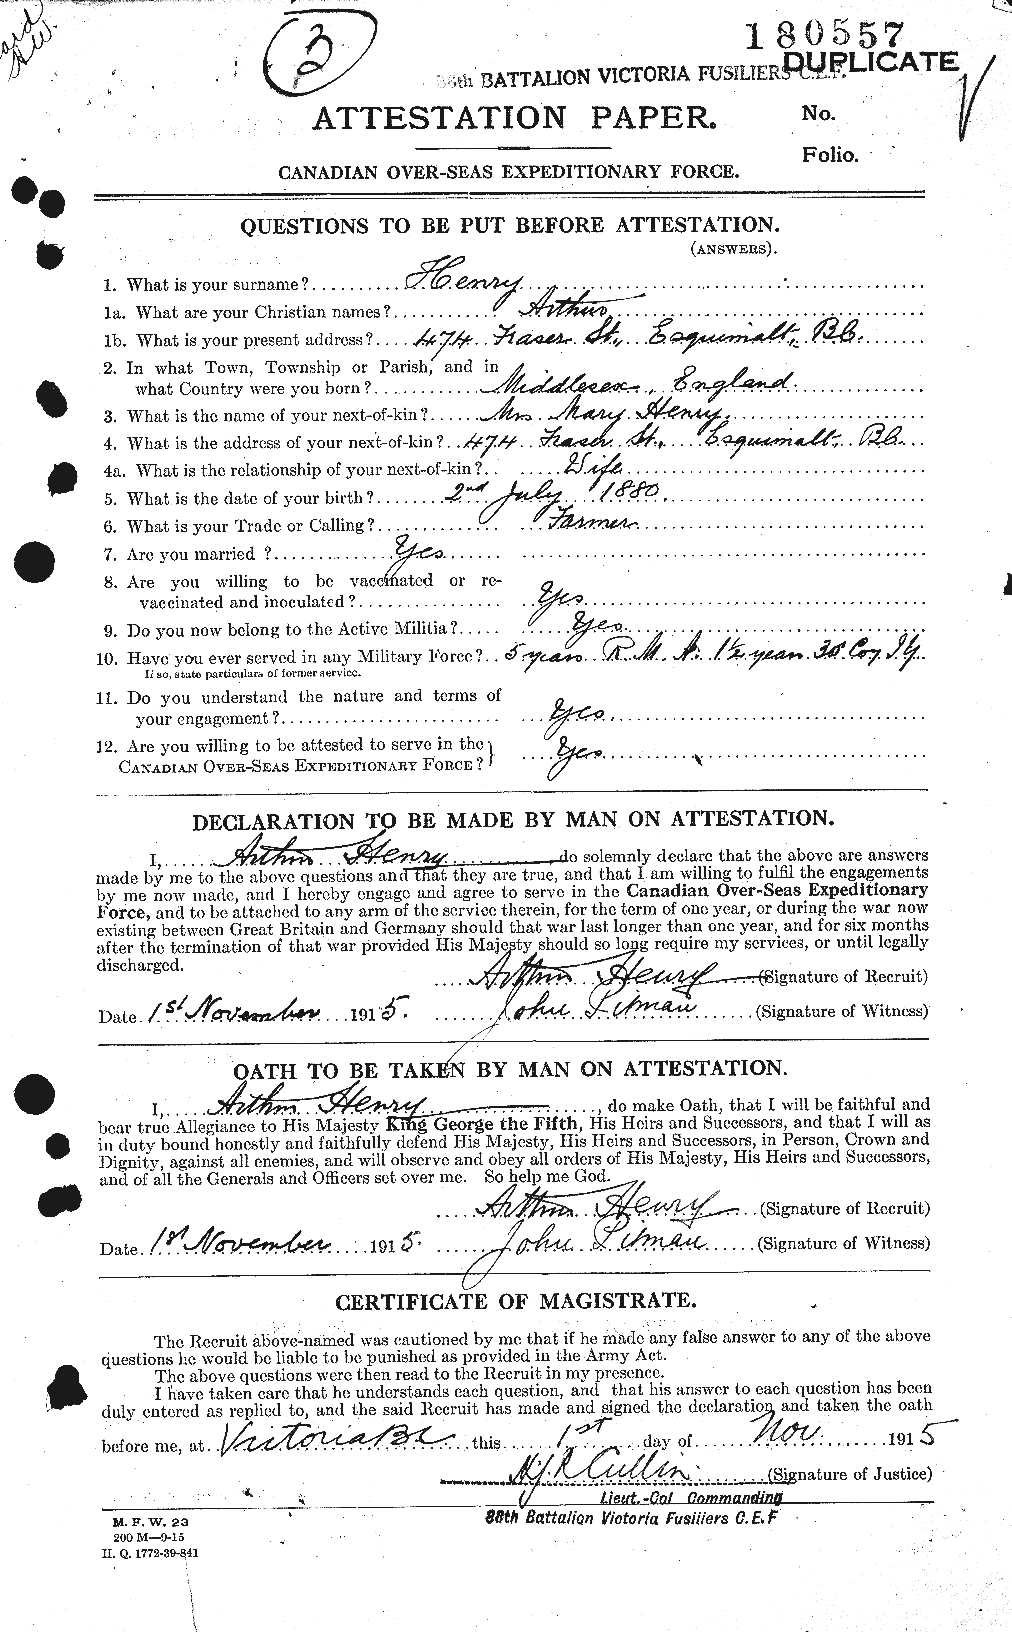 Personnel Records of the First World War - CEF 392782a